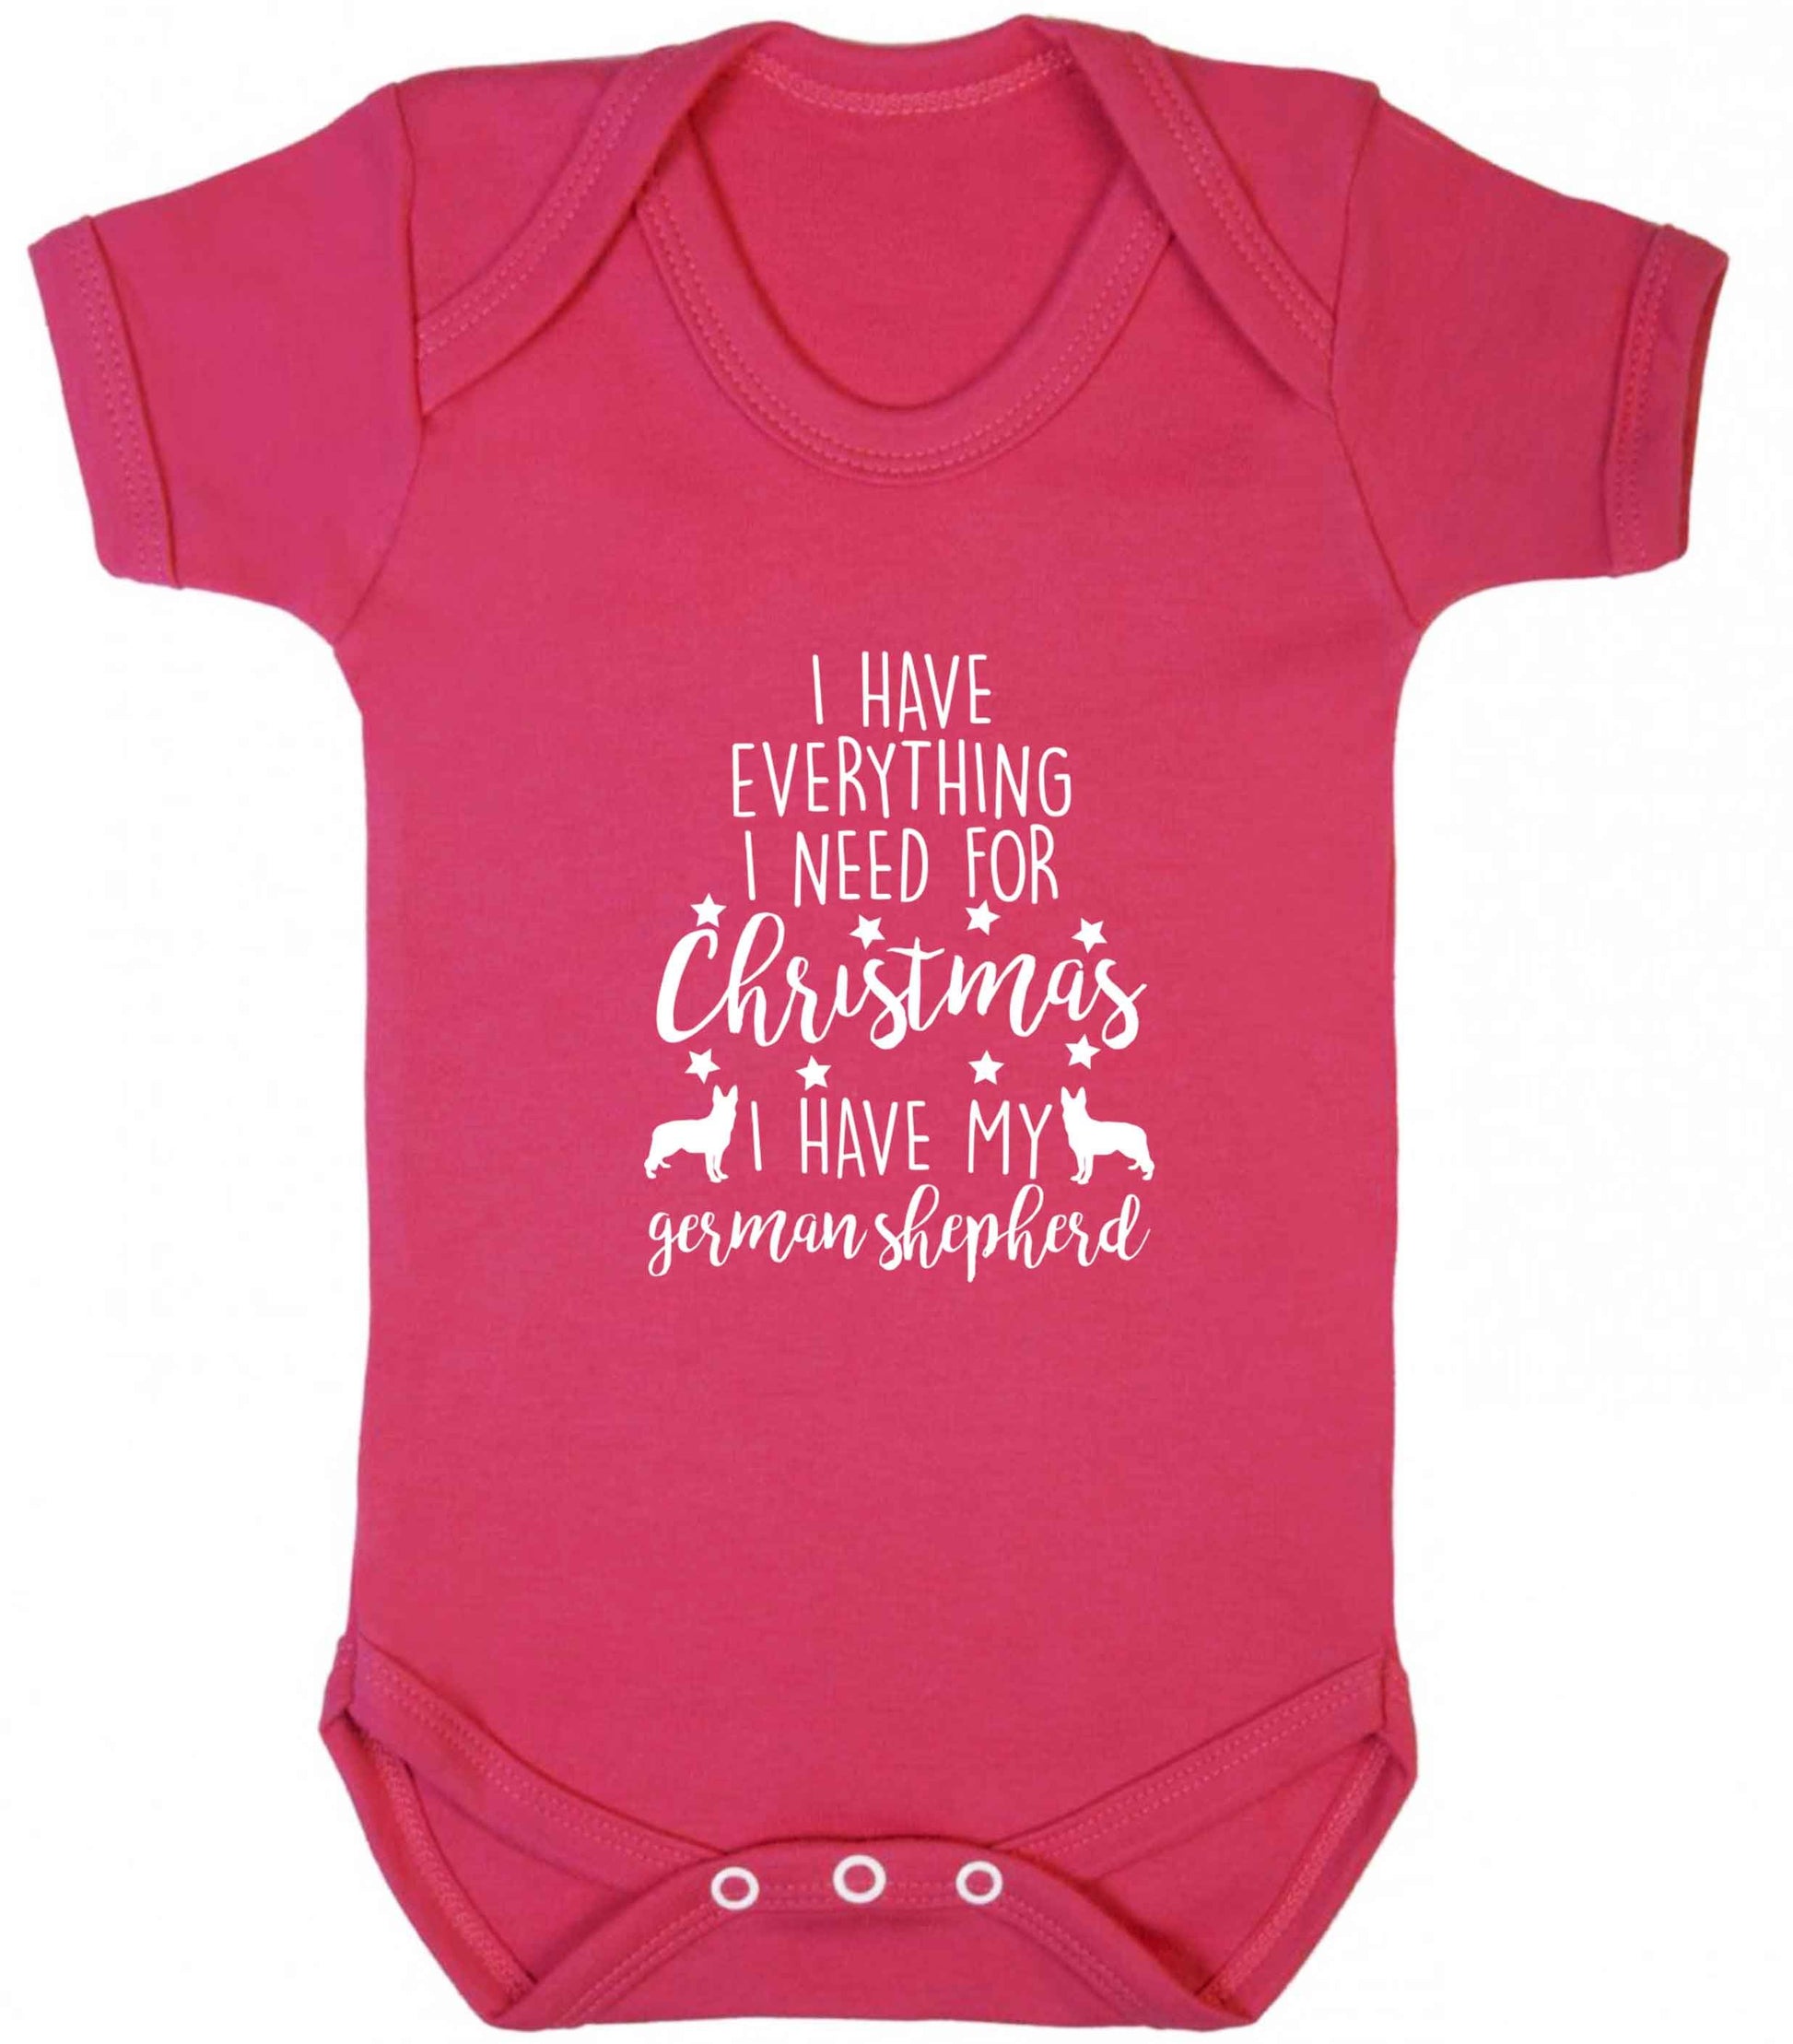 I have everything I need for Christmas I have my german shepherd baby vest dark pink 18-24 months